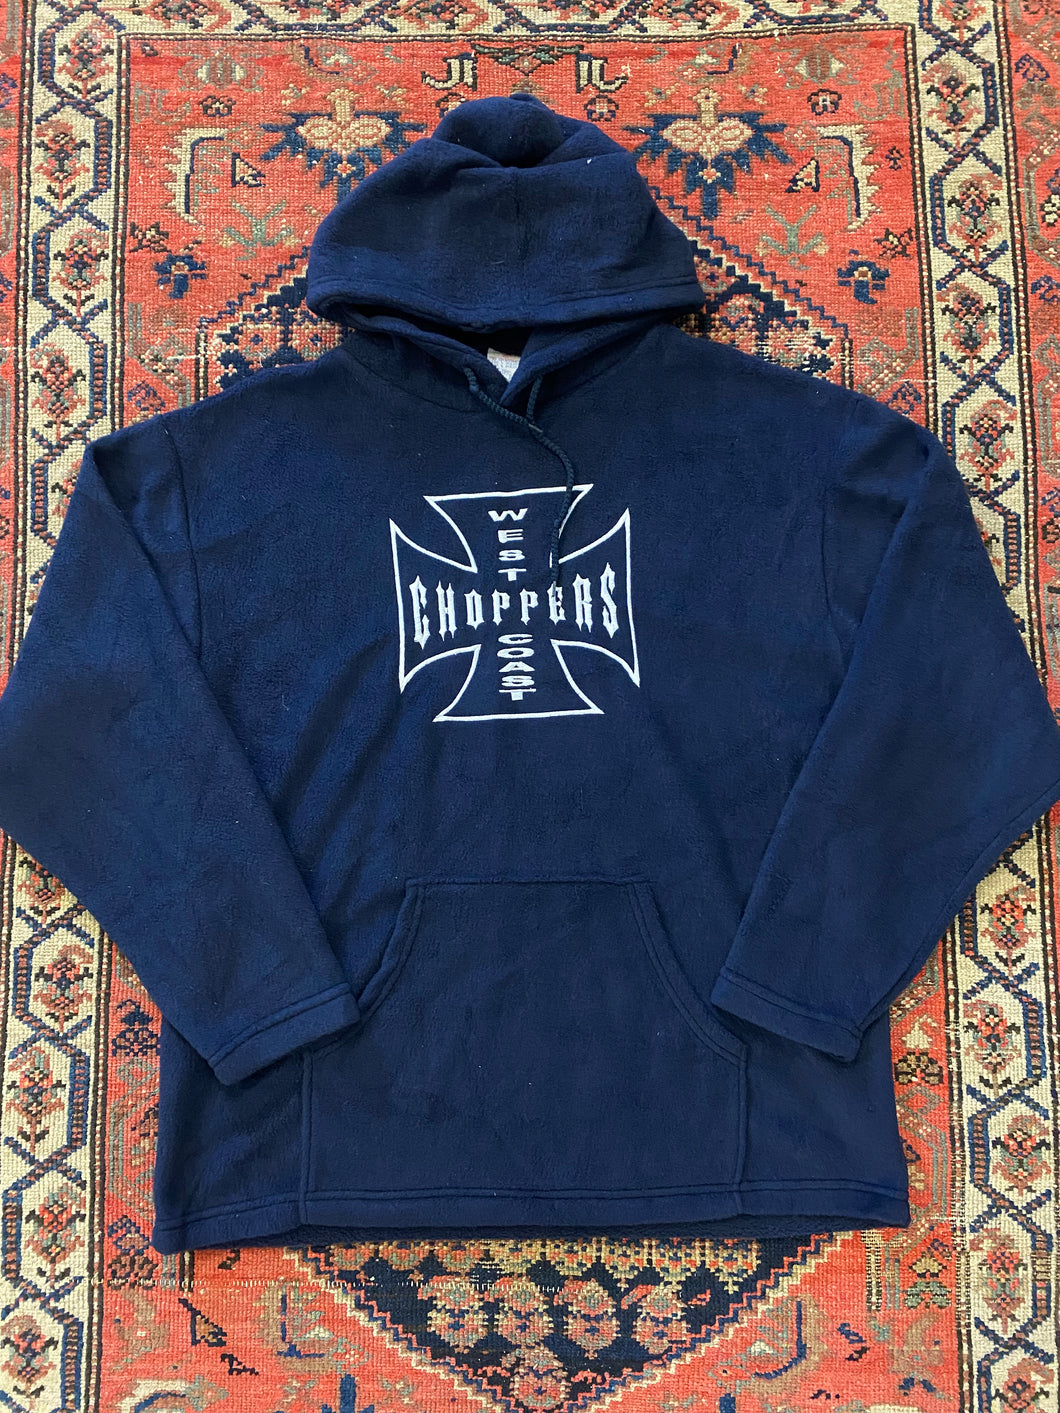 90s Embroidered West Cost Coppers Fleece - L